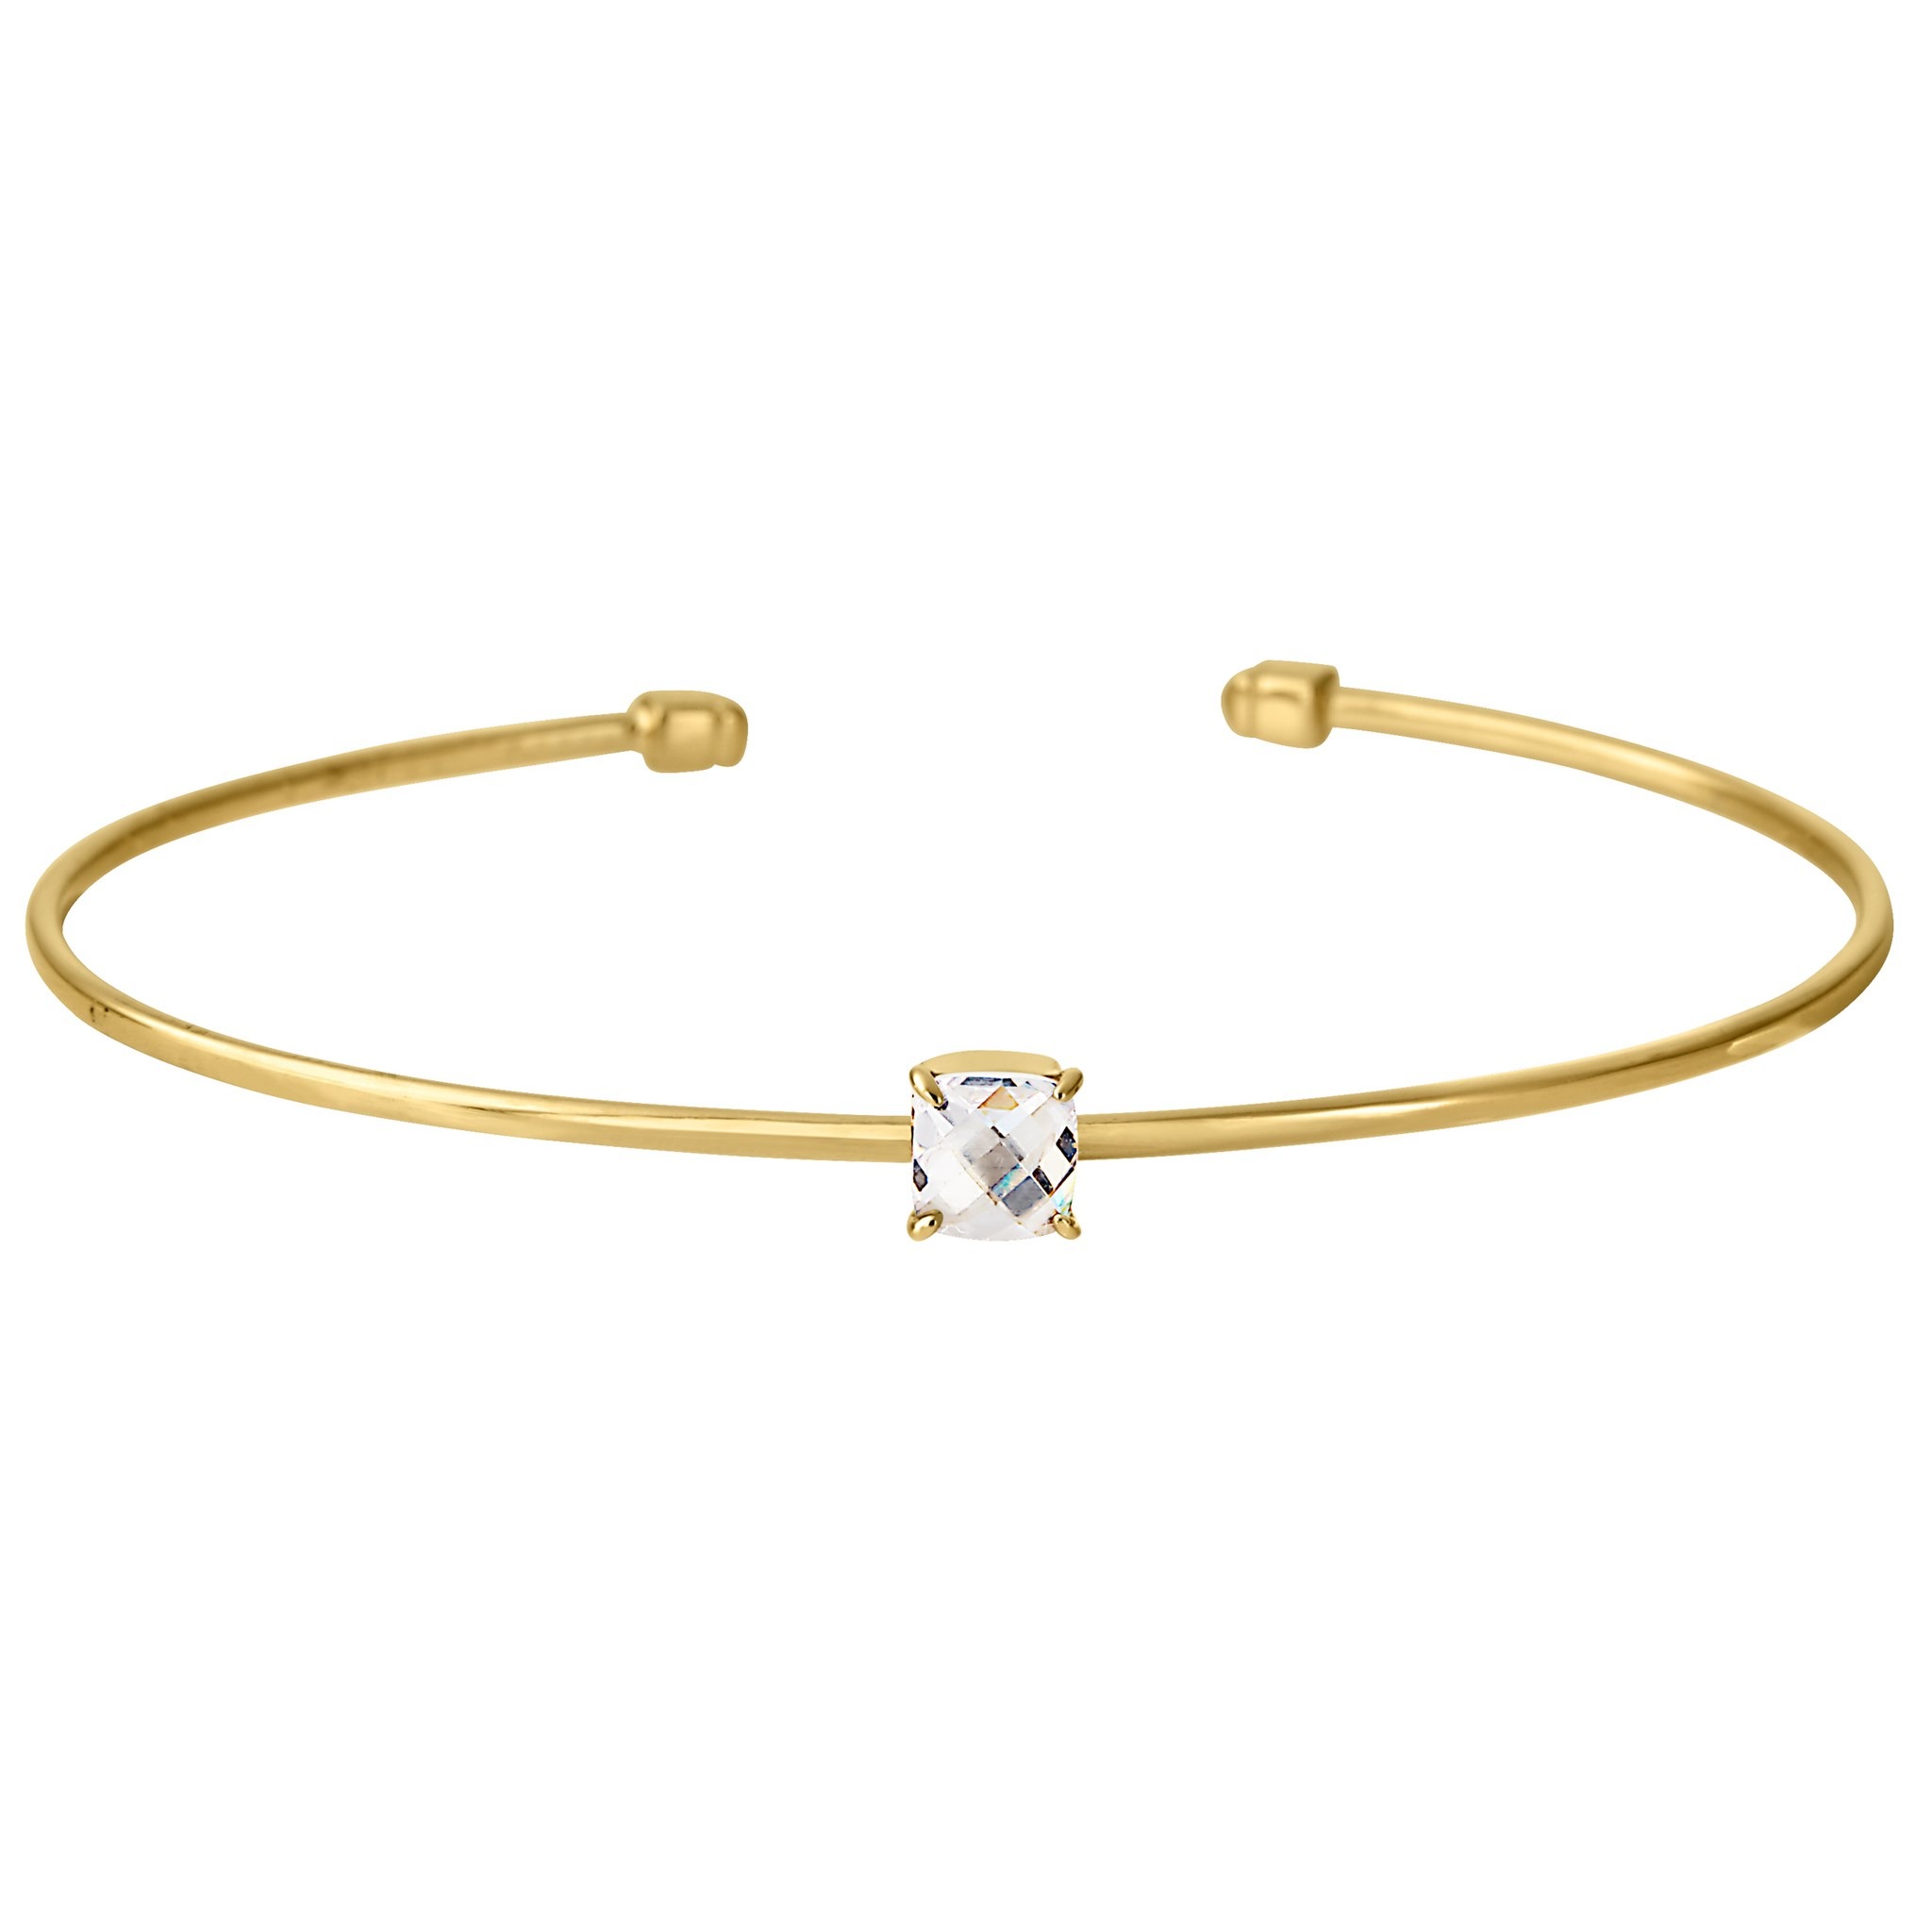 Gold Finish Sterling Silver Pliable Cuff Bracelet with Faceted Cushion Cut Simulated Diamond Birth Gem - April